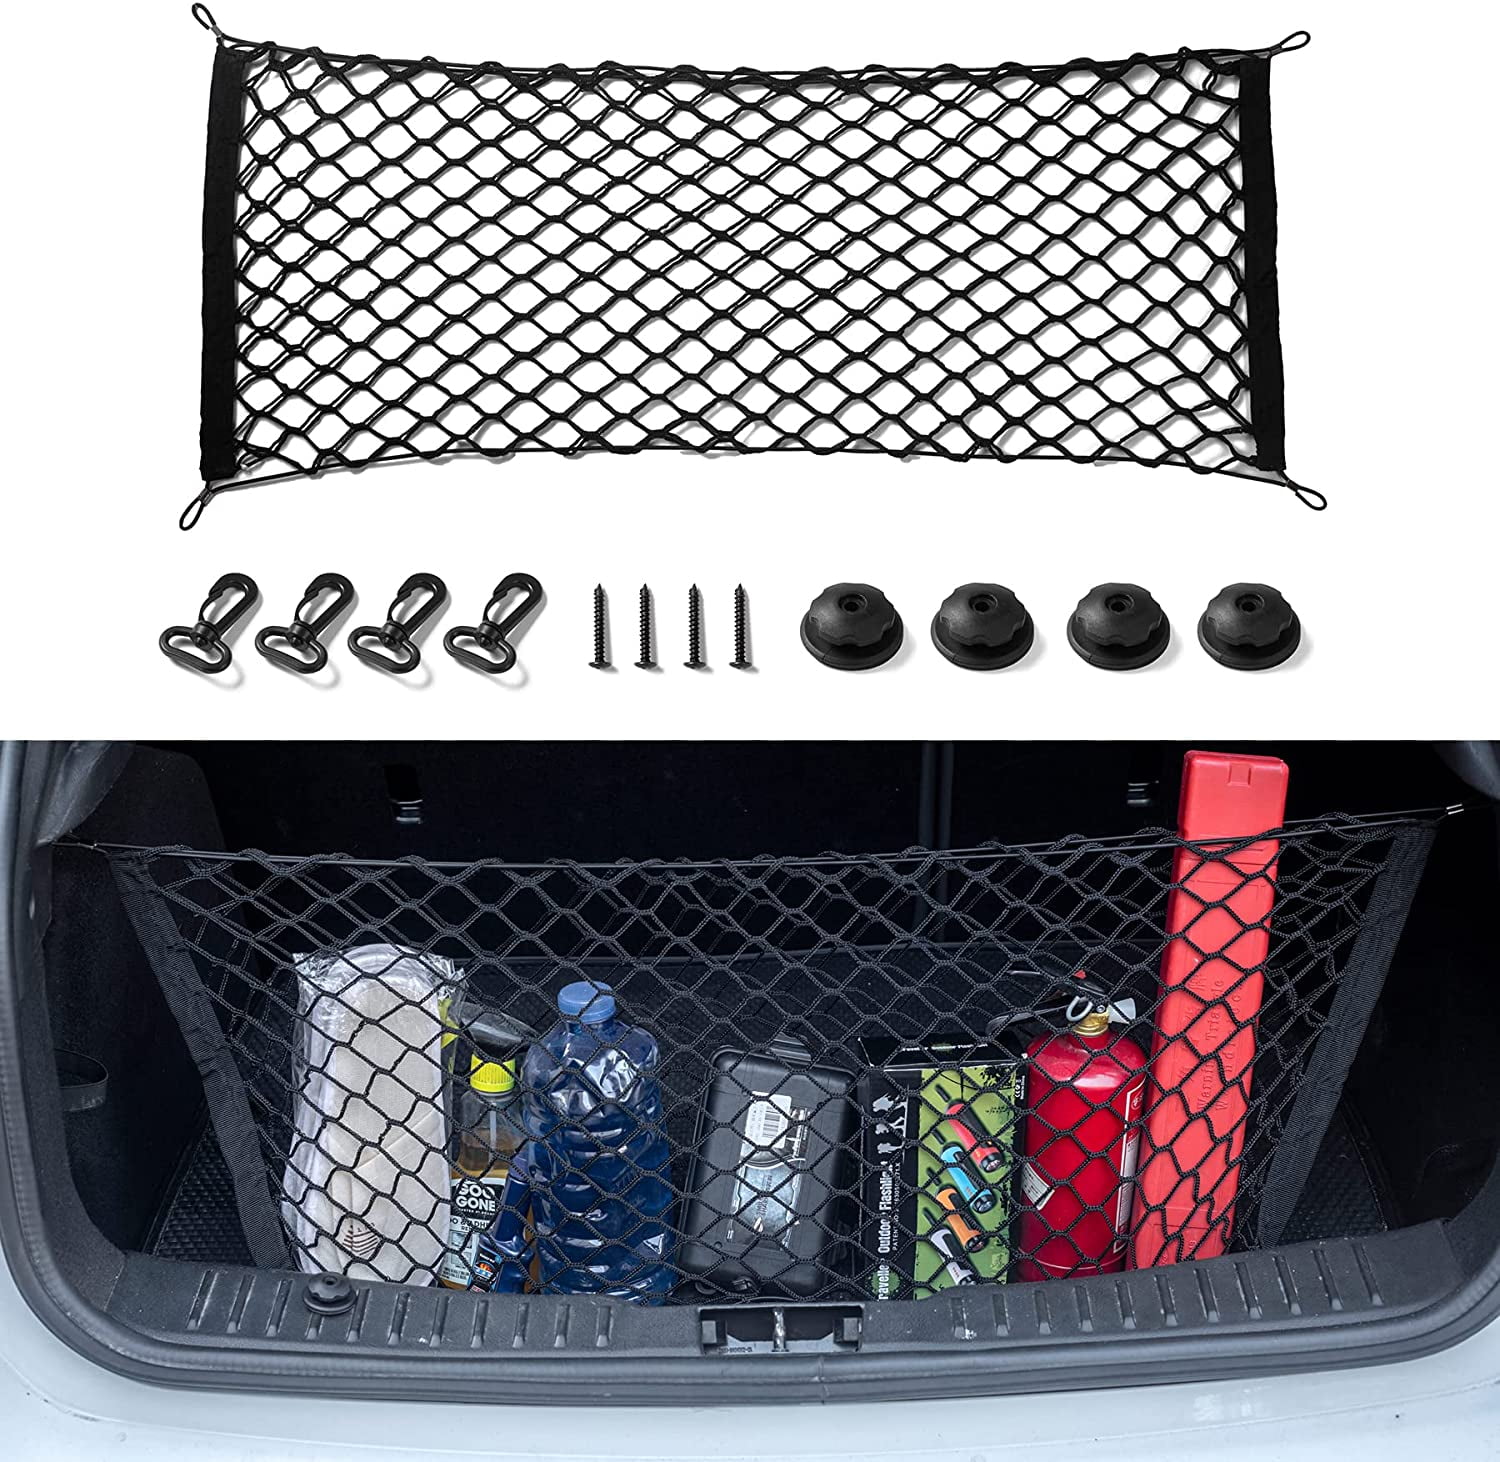 Small Cargo Net For Car Trunk Storage,2 Pack Elastic Mesh Net Pocket  Organizer Pouch Bag,stretchable Automotive Cargo Nets With 8 Pieces  Mounting Scre